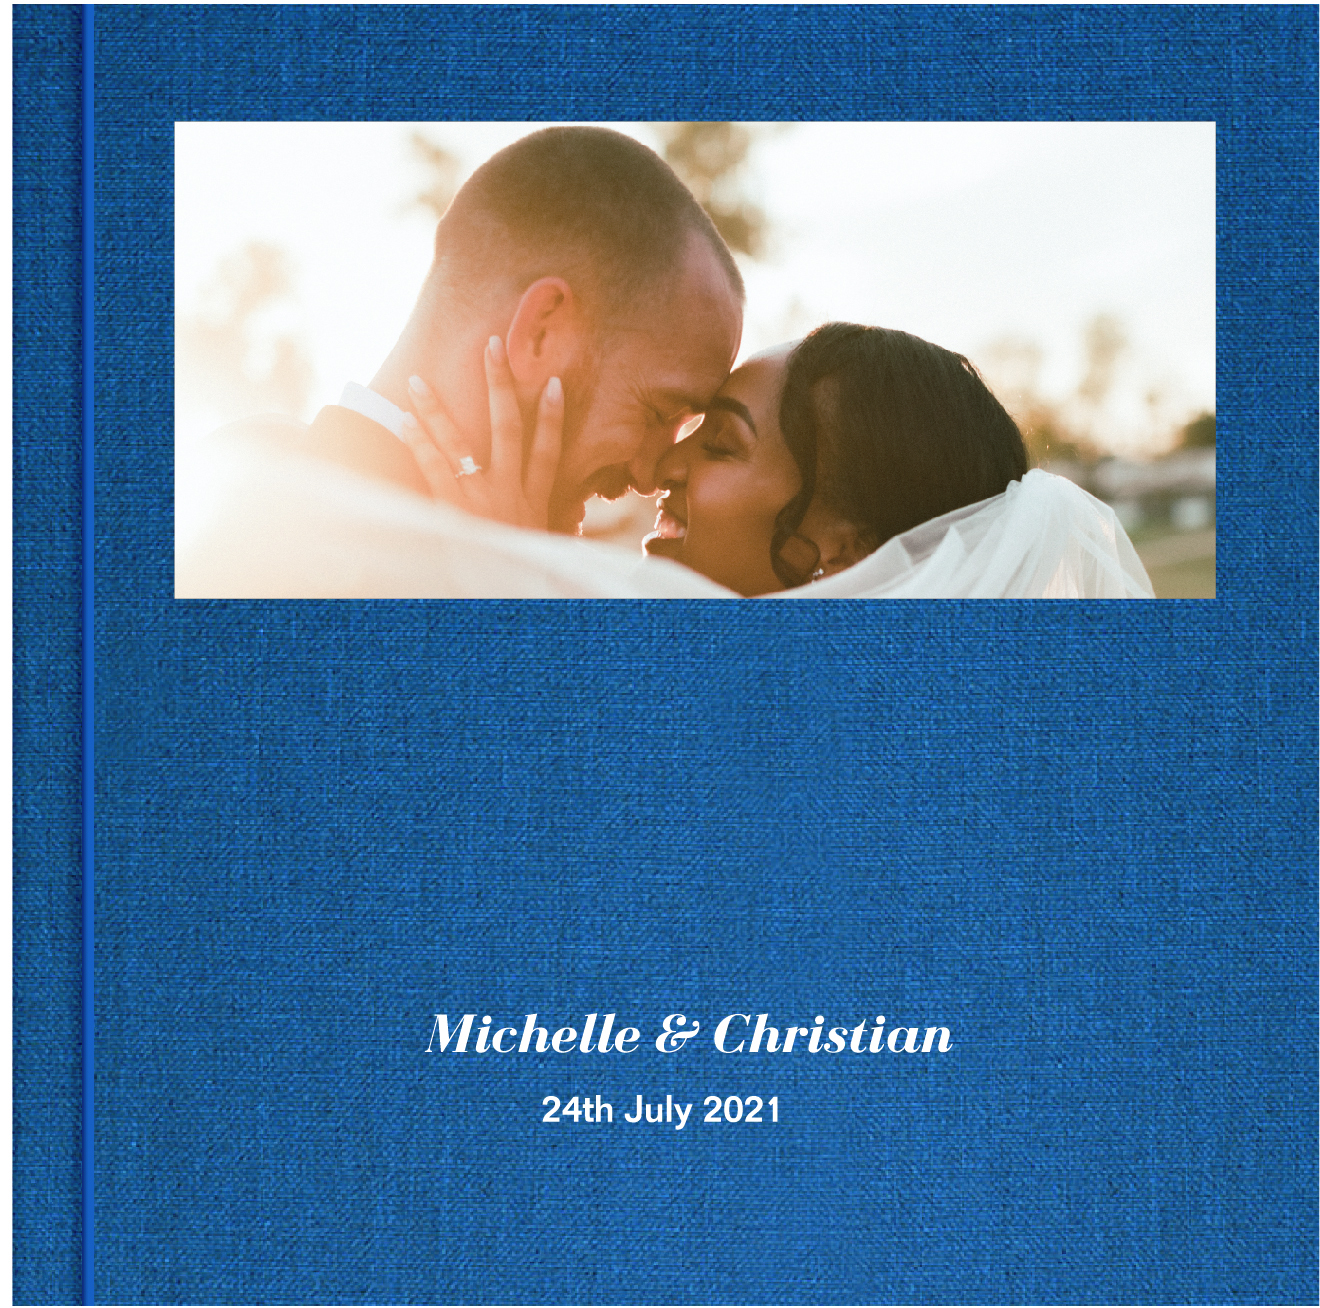 Wedding photo book with photo window showing picture of couple